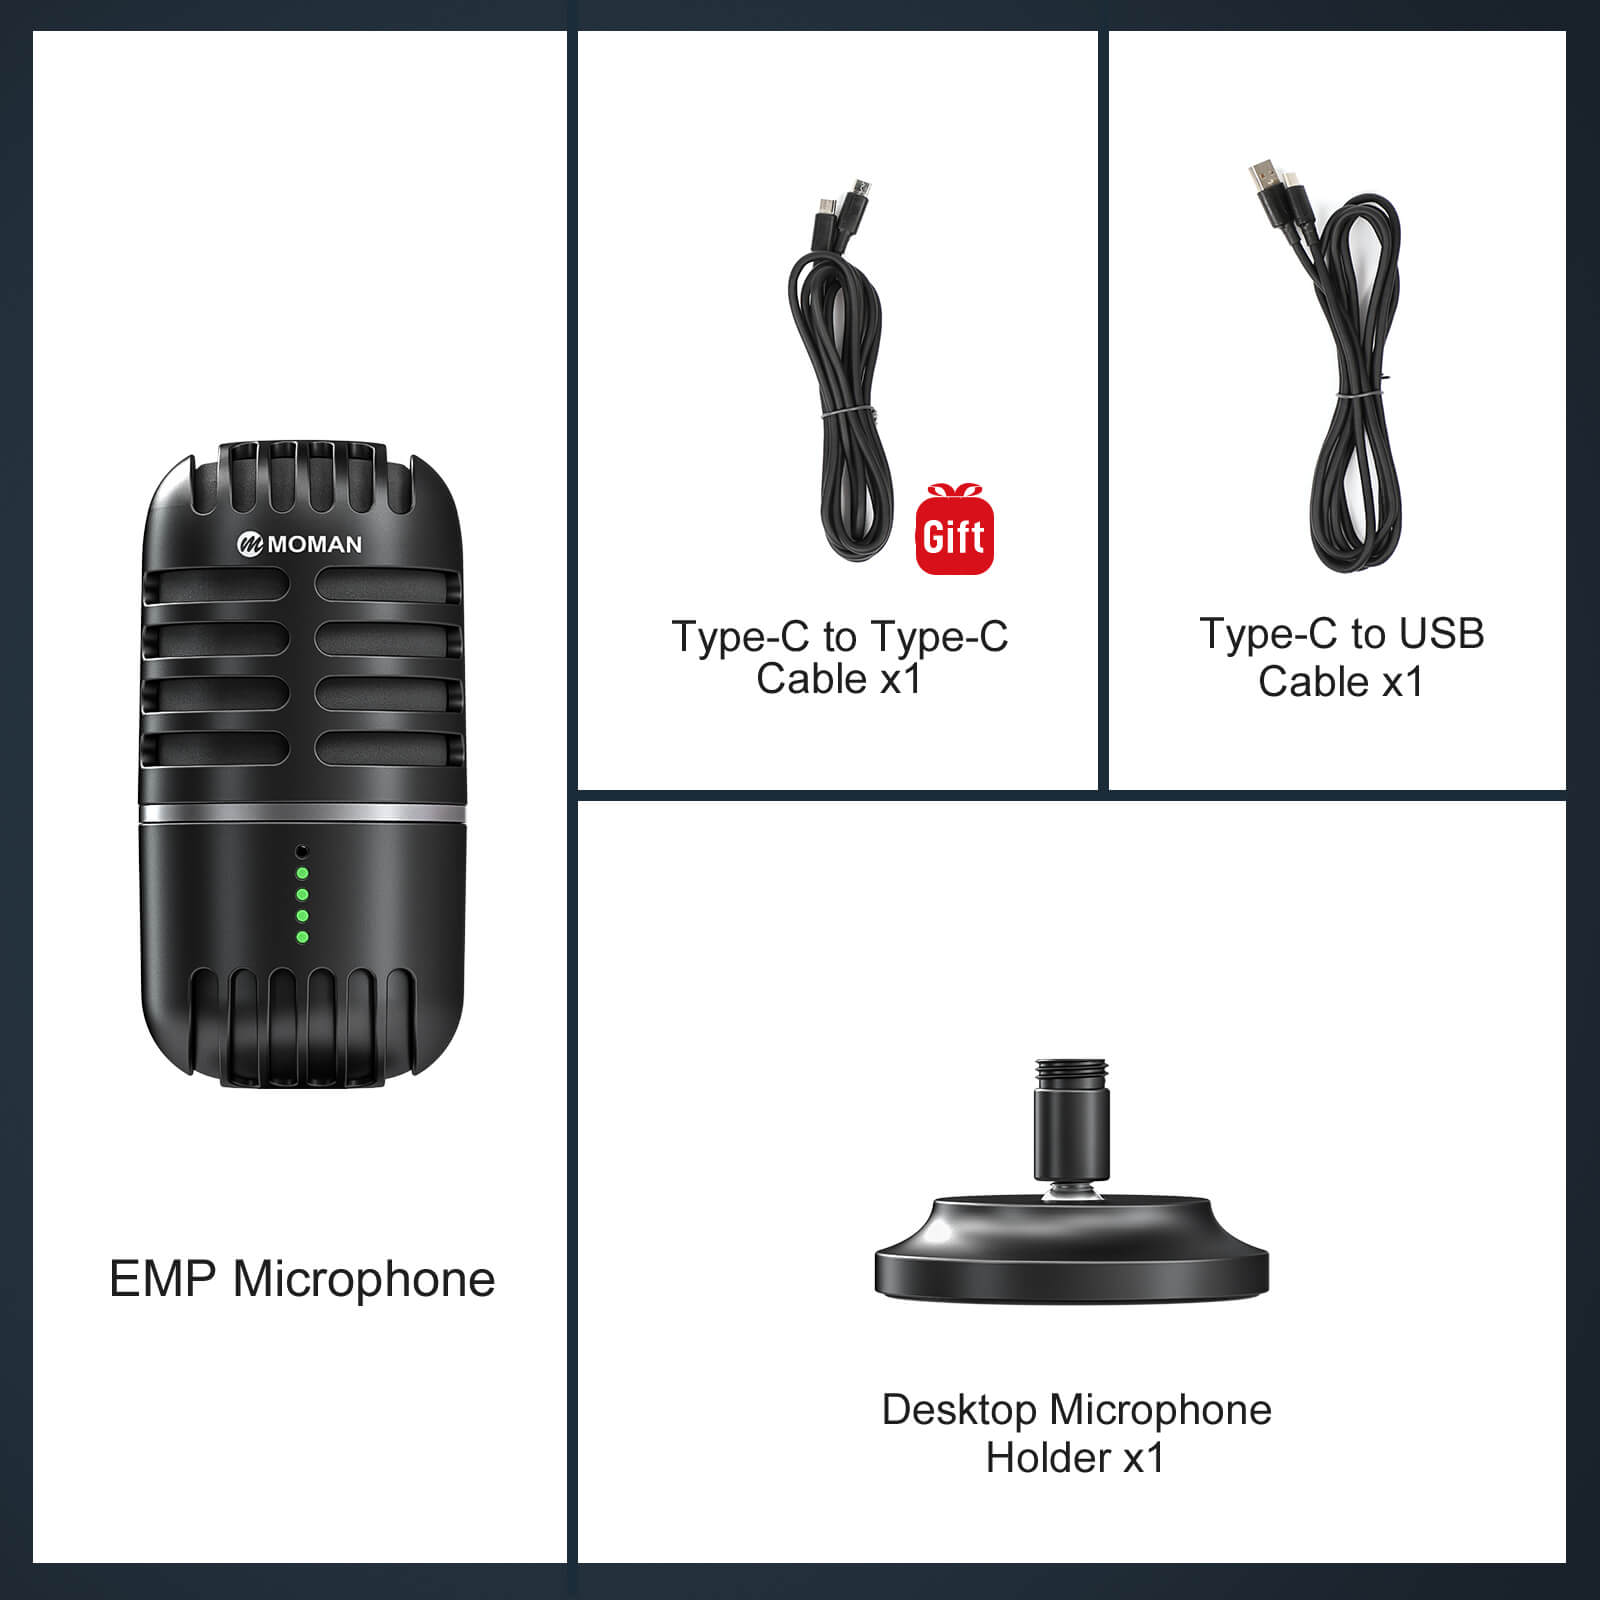 Package content of Moman EMP USB microphone, with a Type-C to Type-C cable as a free gift included